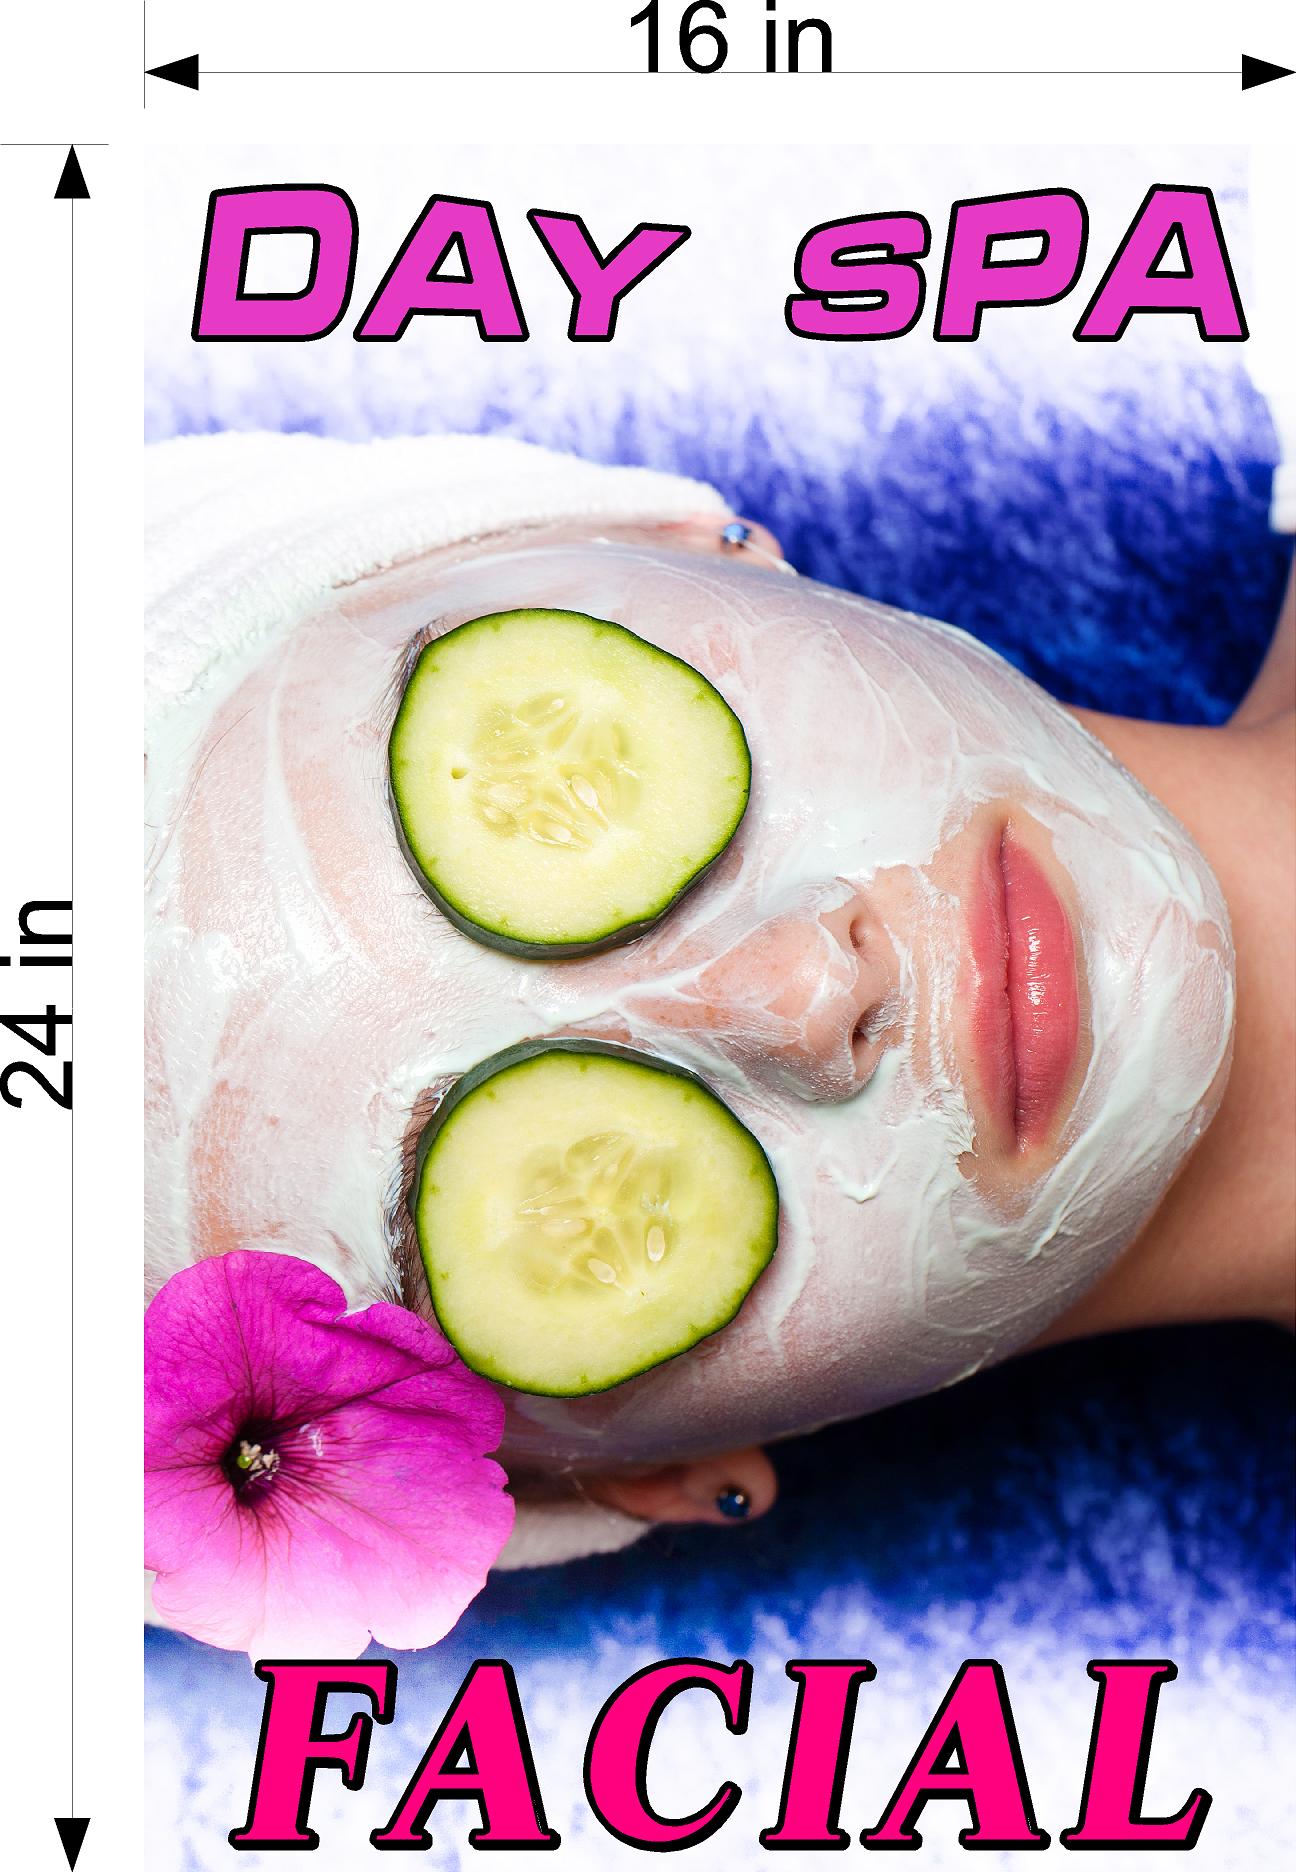 Facial 05 Photo-Realistic Paper Poster Interior Inside Wall Non-Laminated Vertical Day Spa